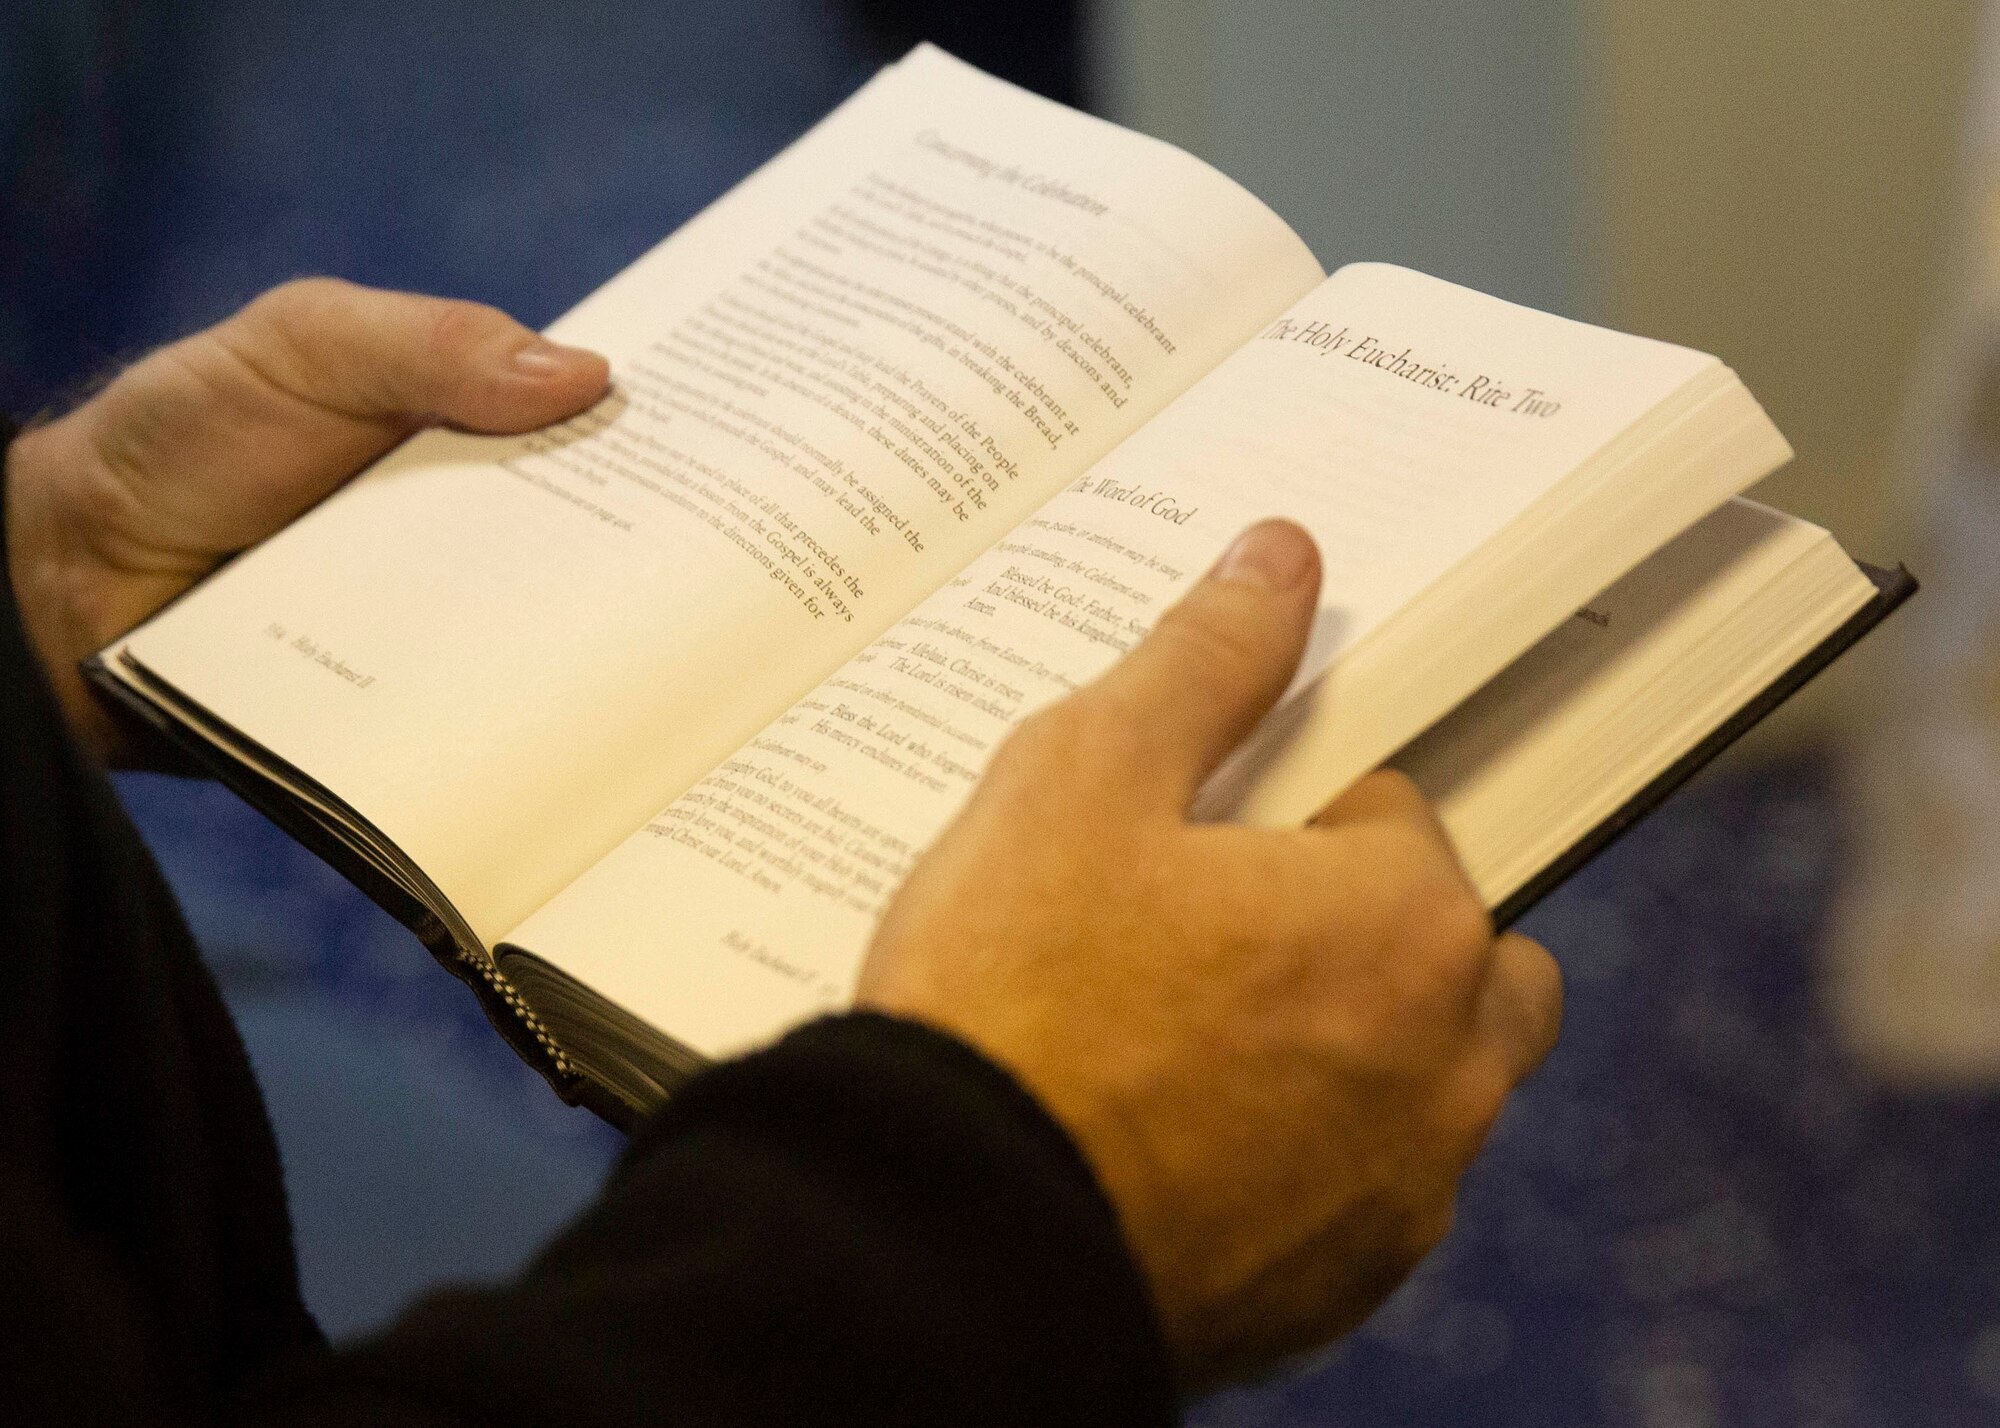 A Sailor reads a bible during Protestant church service aboard USS Iwo Jima (LHD 7), Oct. 14. Church services allow Marines and Sailors to practice their faith while underway. (U.S. Marine Corps photo by Lance Cpl. Gumchol Cho)